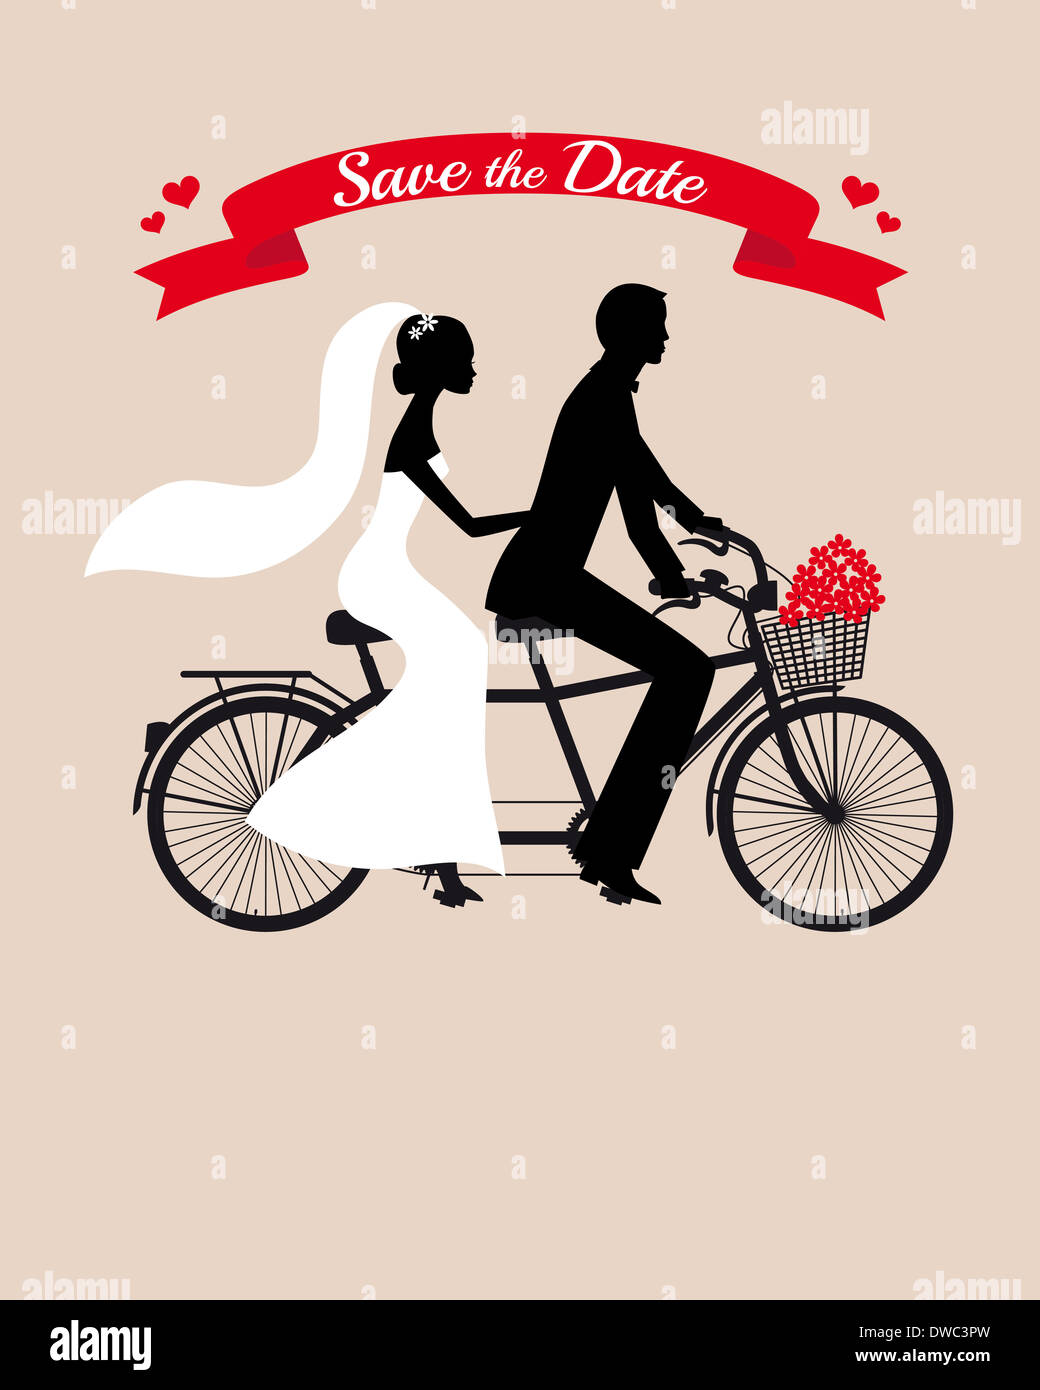 wedding, save the date, bride and groom on tandem bicycle Stock Photo